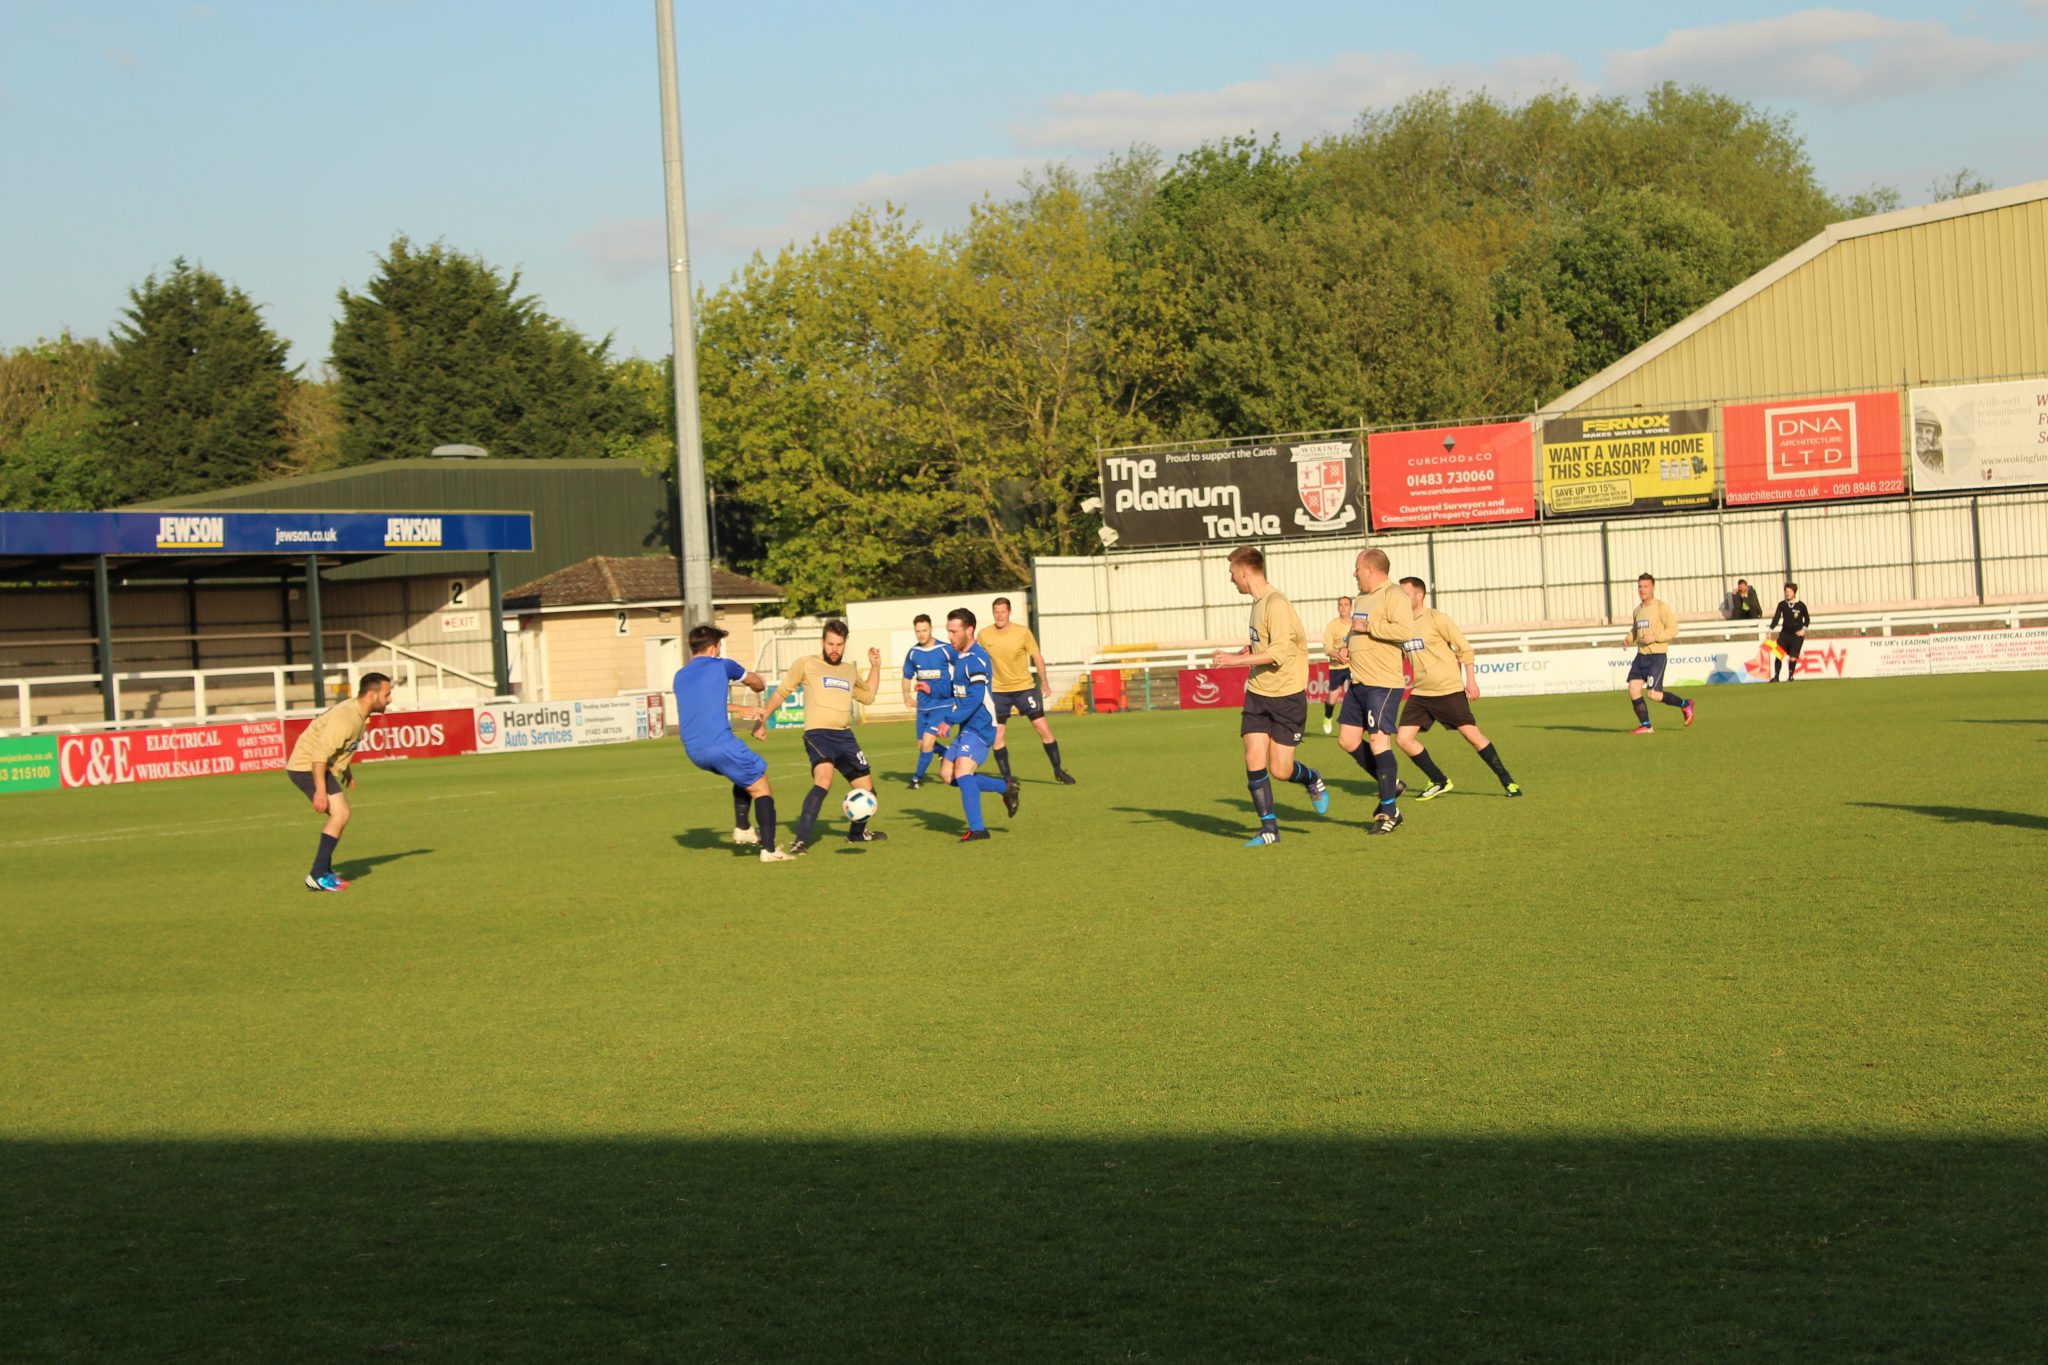 JEWSON SCORES FUNDRAISING GOAL IN CHARITY FOOTBALL MATCH